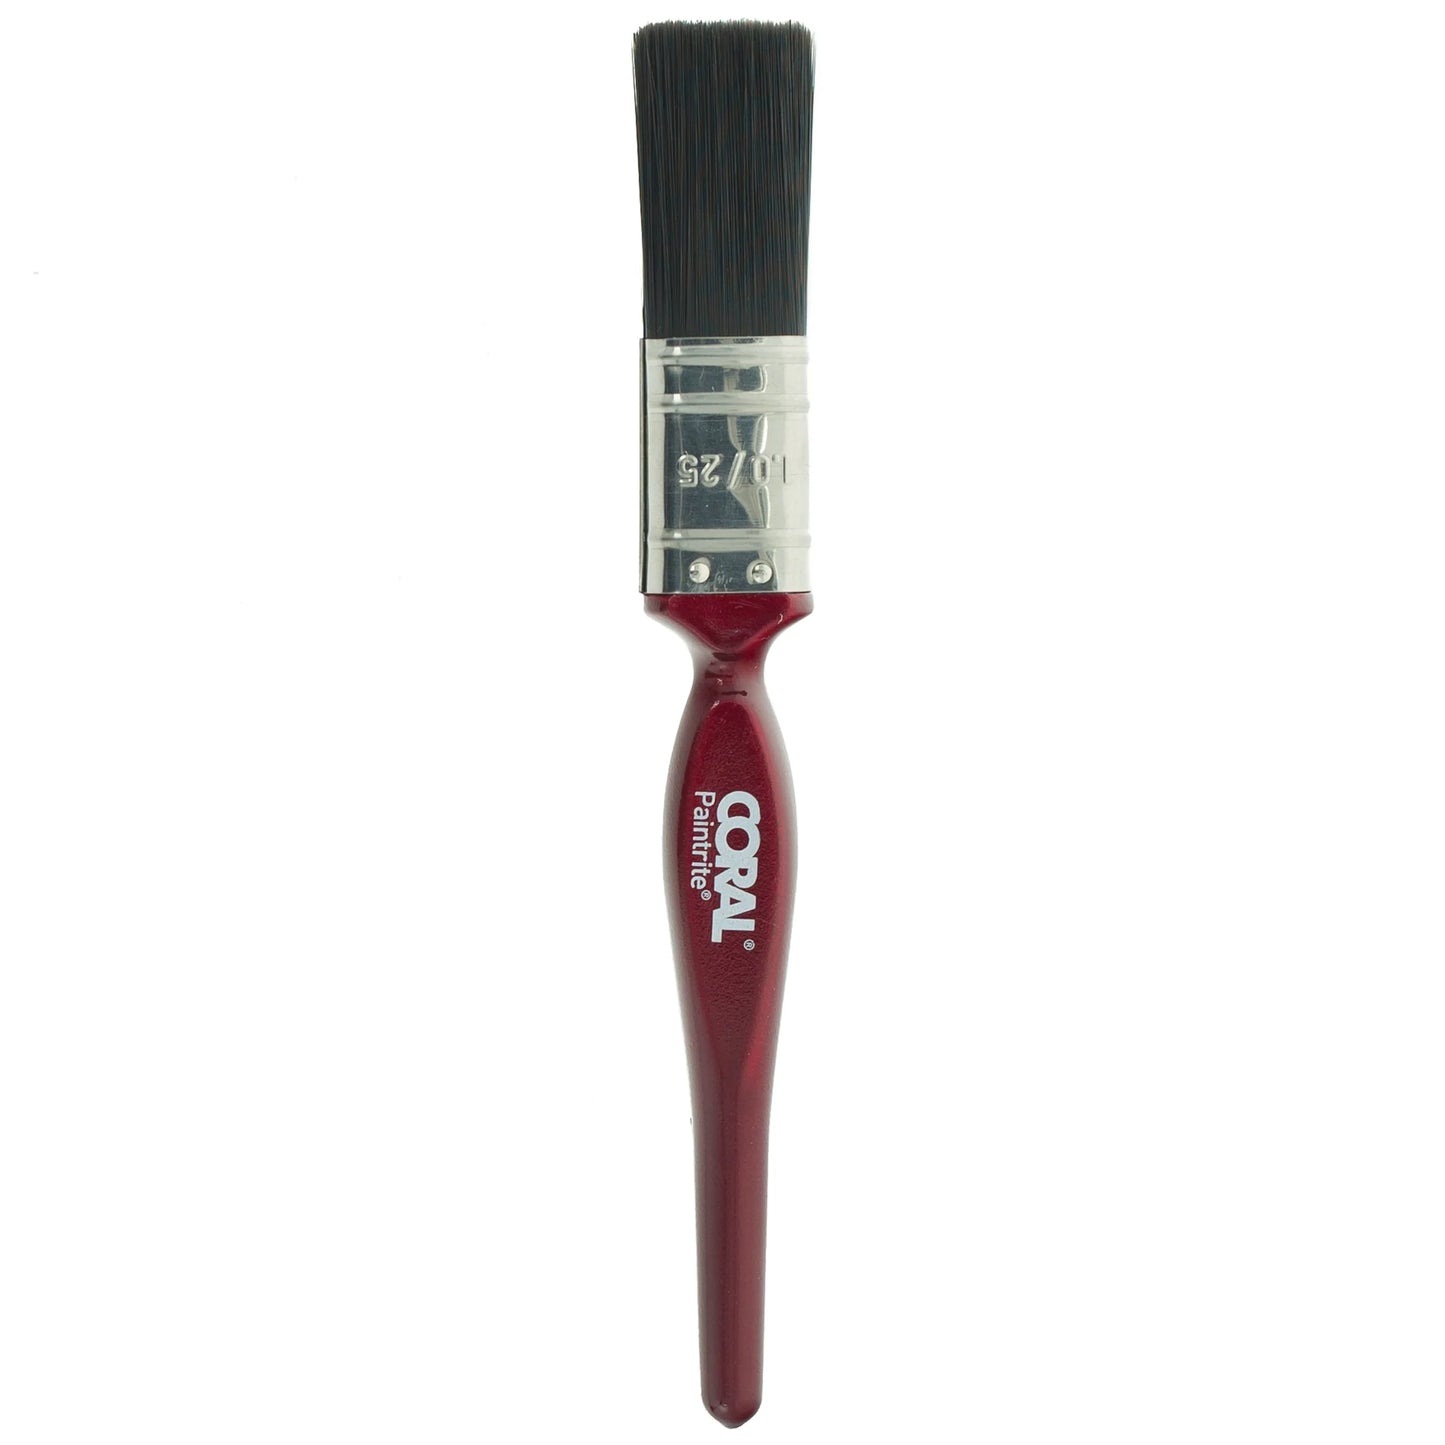 Paintrite Paint Brush 1" (25mm) by Coral Tools